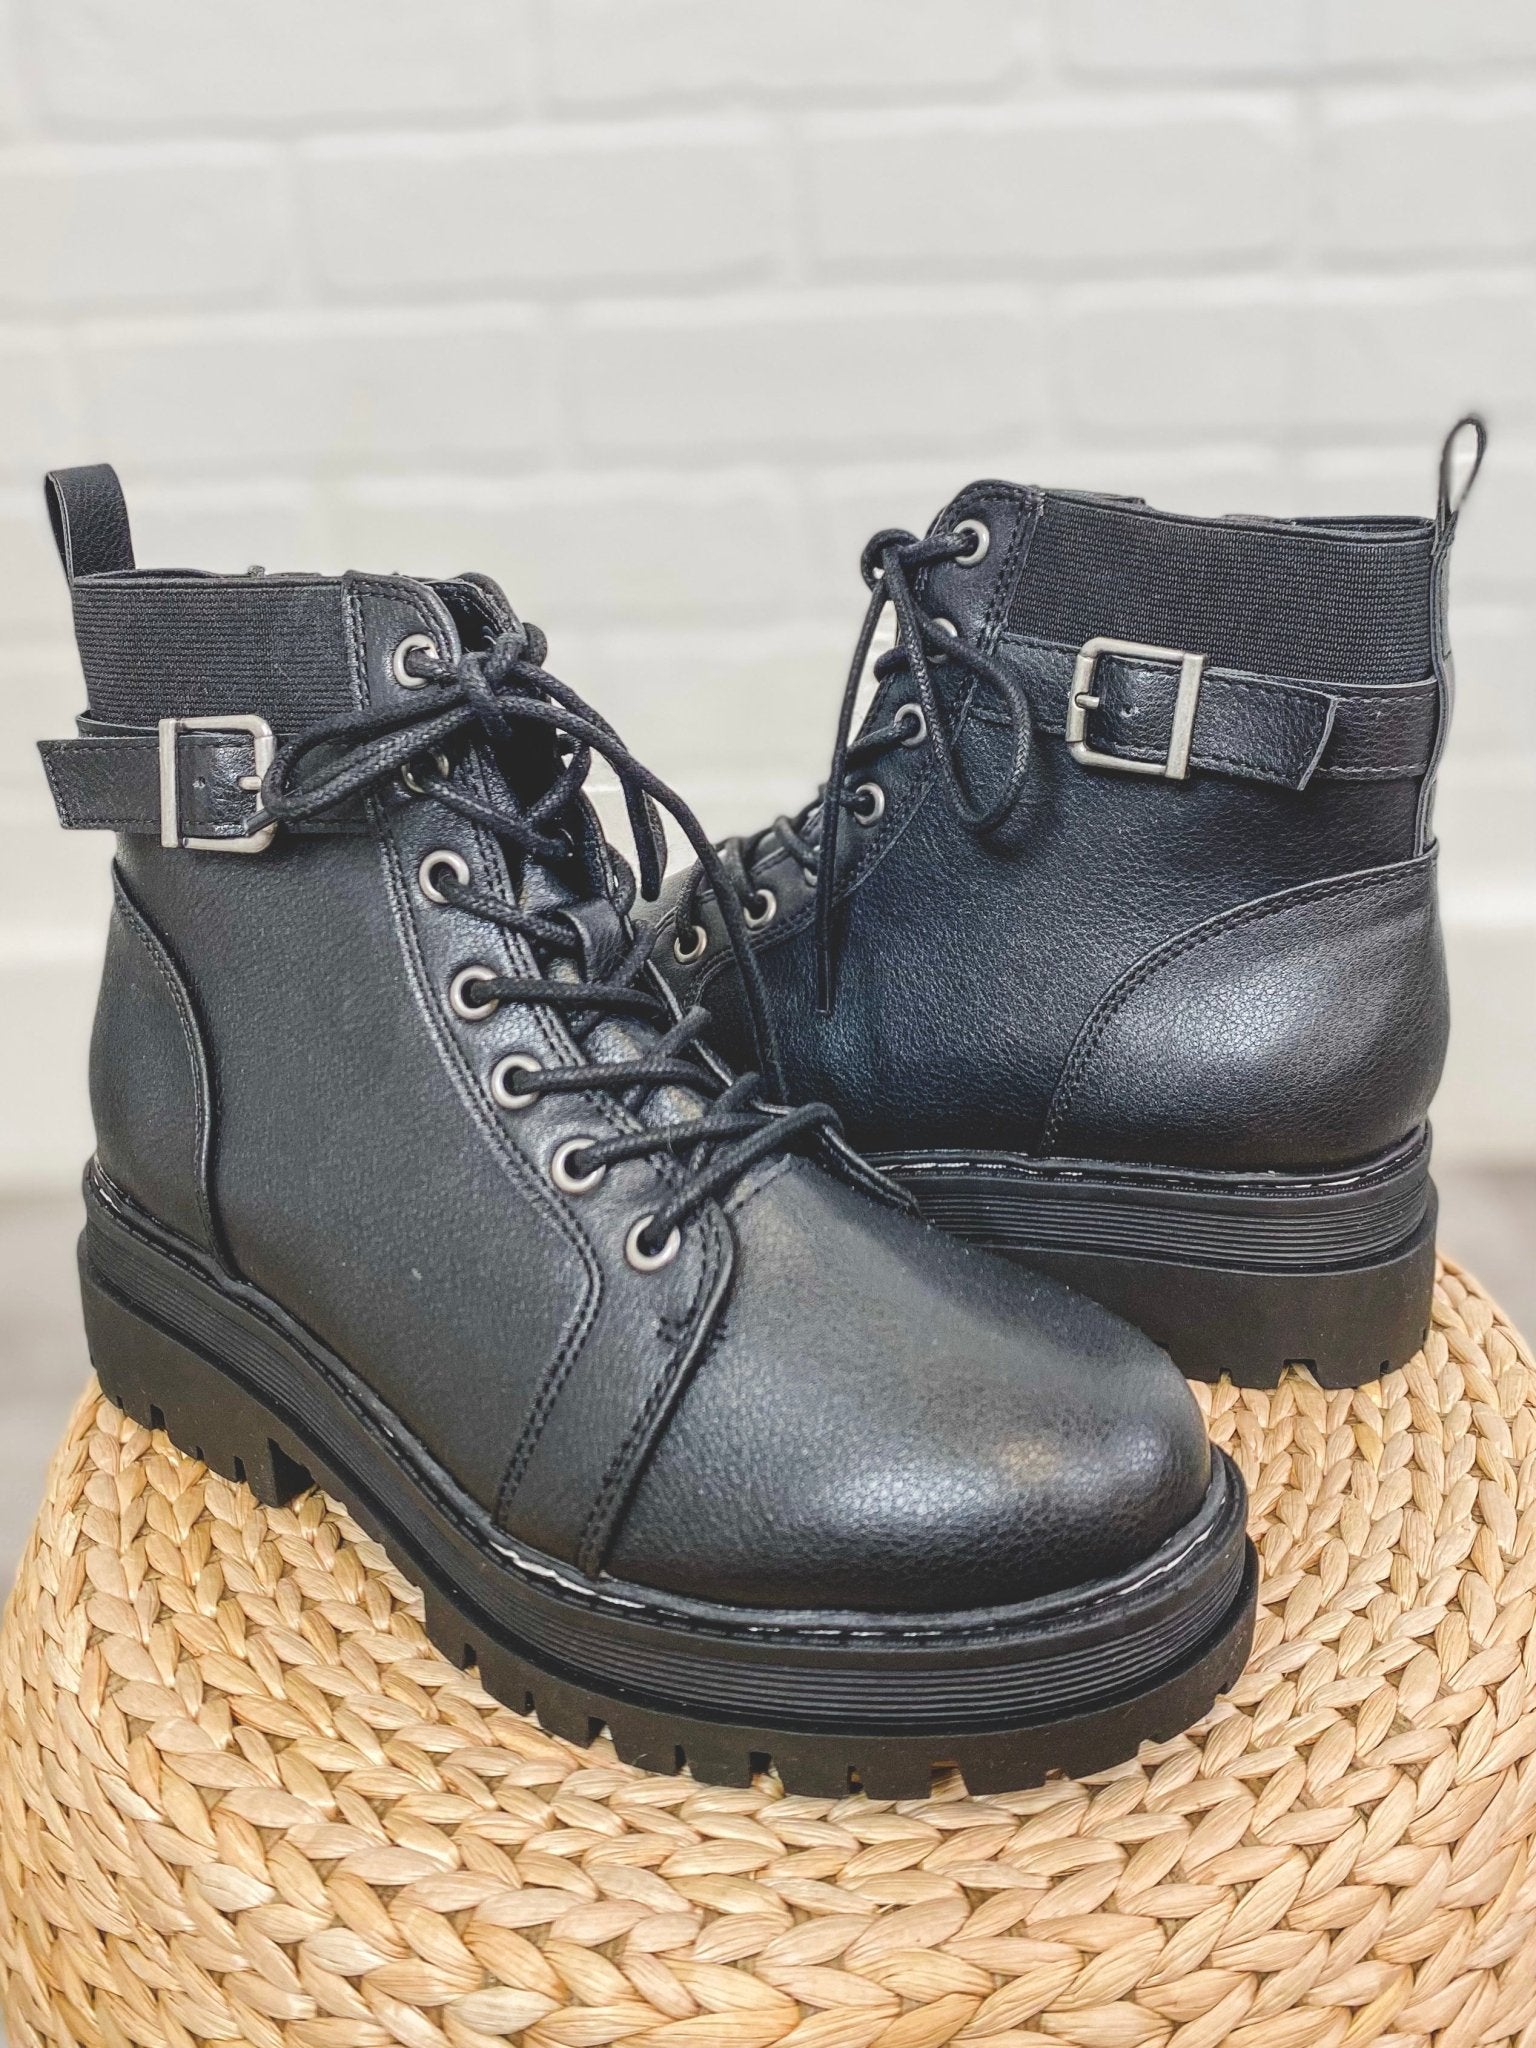 Lace up combat boots black - Cute Shoes - Trendy Shoes at Lush Fashion Lounge Boutique in Oklahoma City